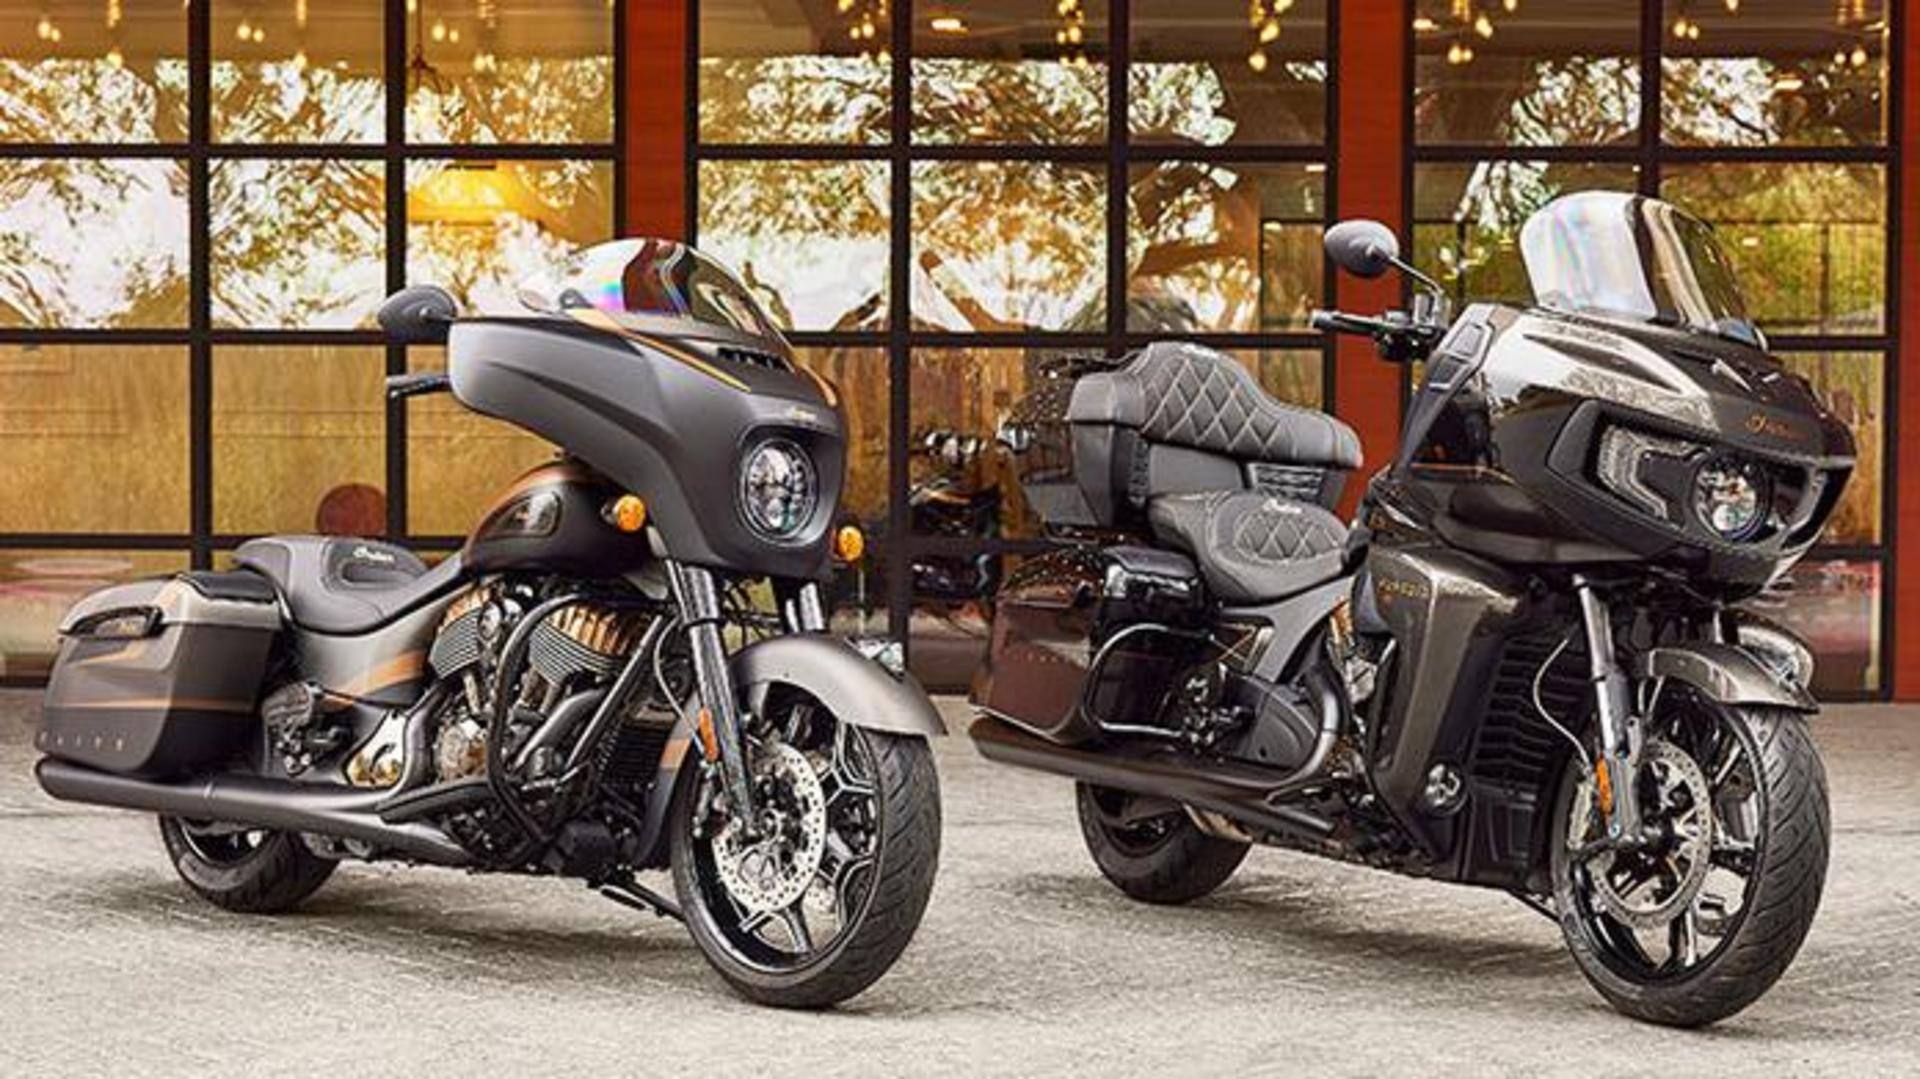 Indian Pursuit Elite and Chieftain Elite debut as limited-edition models 